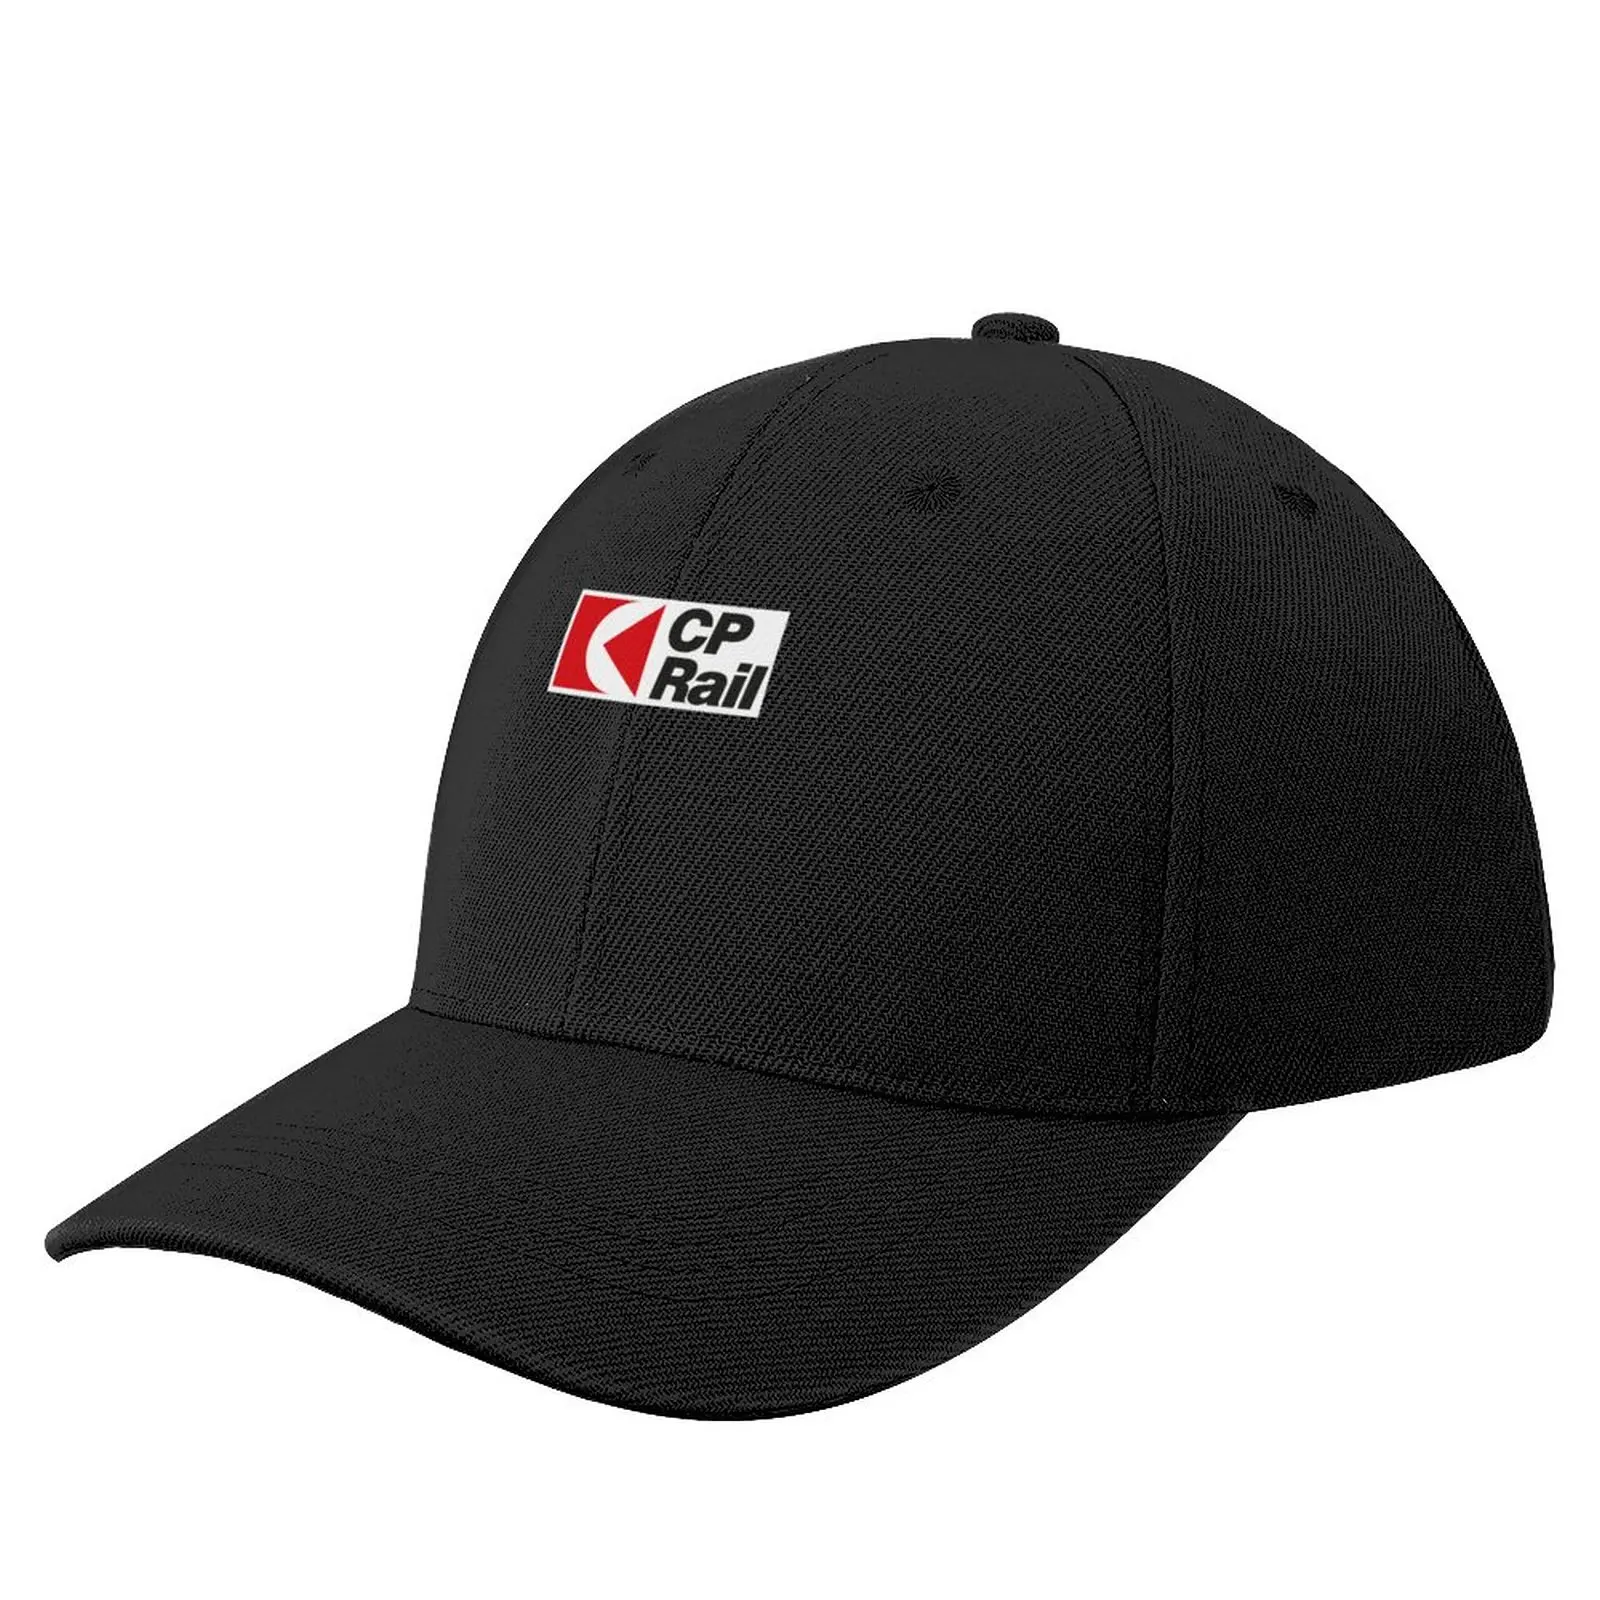 

Canadian Pacific (CP) Rail - 1968 Logo Classic T-Shirt Baseball Cap fashionable New In The Hat Hat For Women Men's